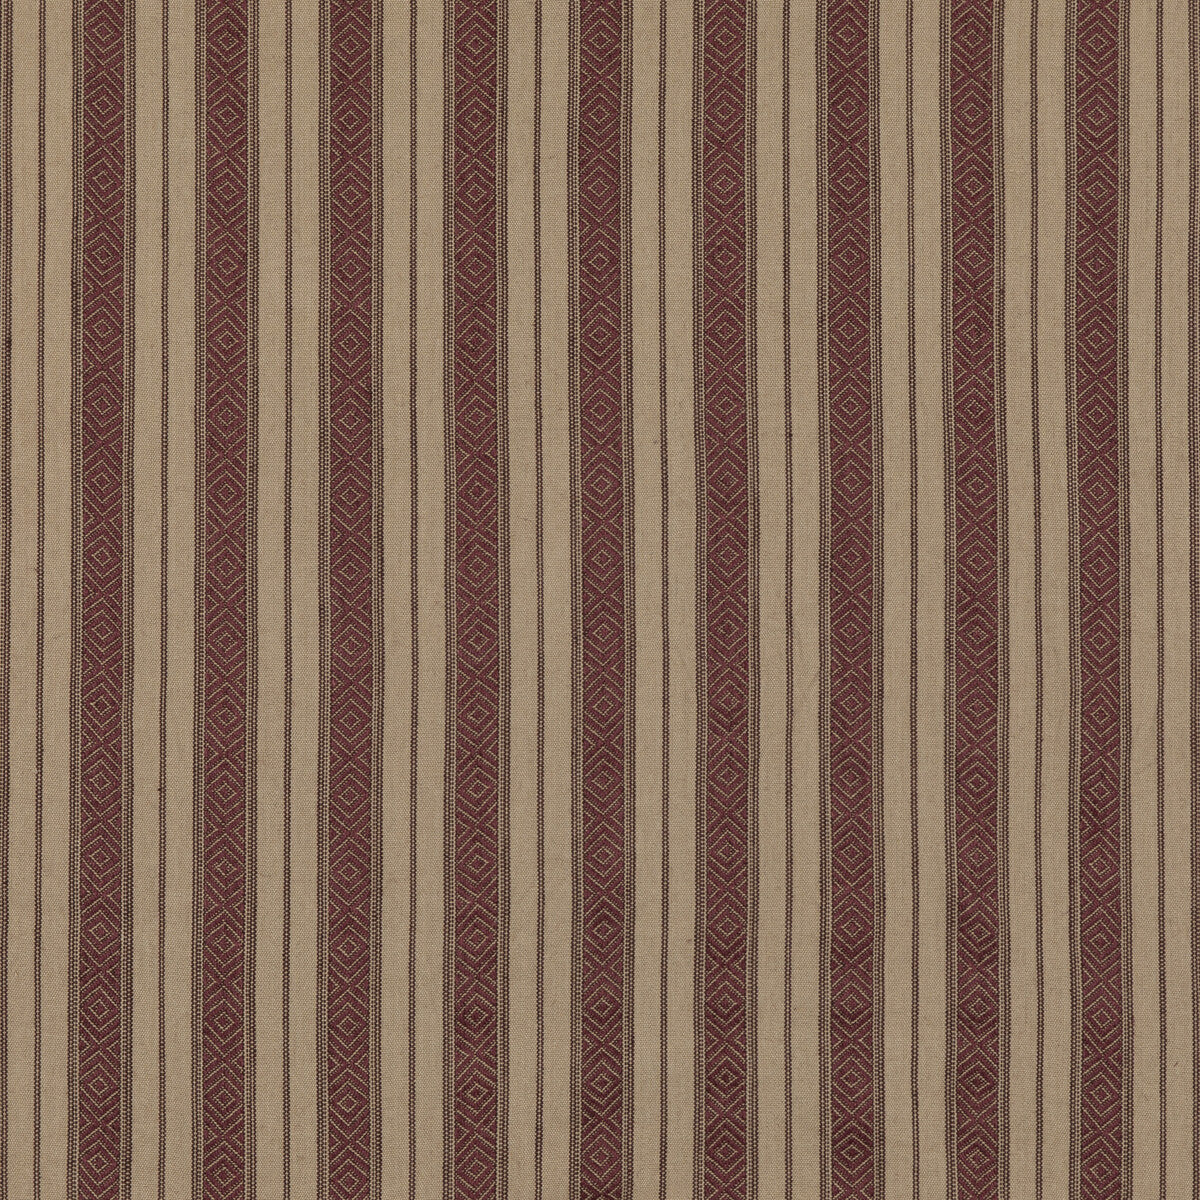 Cowdray Stripe fabric in plum color - pattern FD790.H113.0 - by Mulberry in the Mulberry Stripes II collection